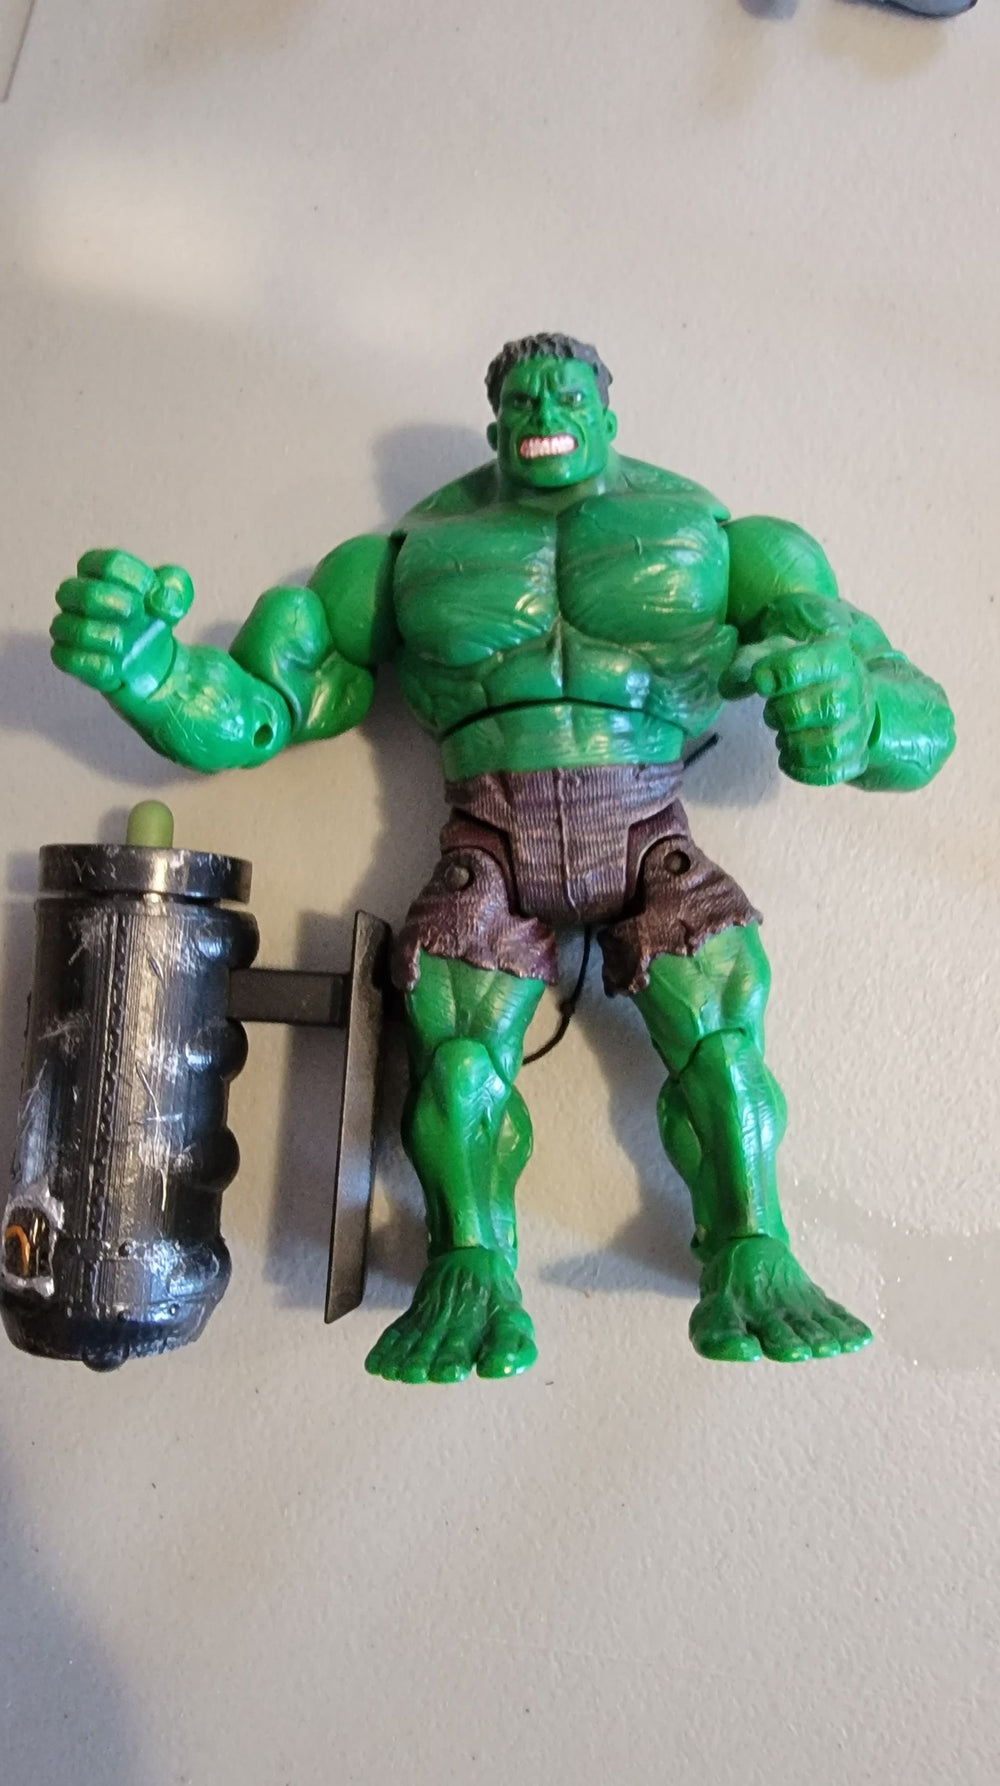 THE HULK 2003 Superposable Action Figure Official Movie Figure (LOOSE - As Shown)